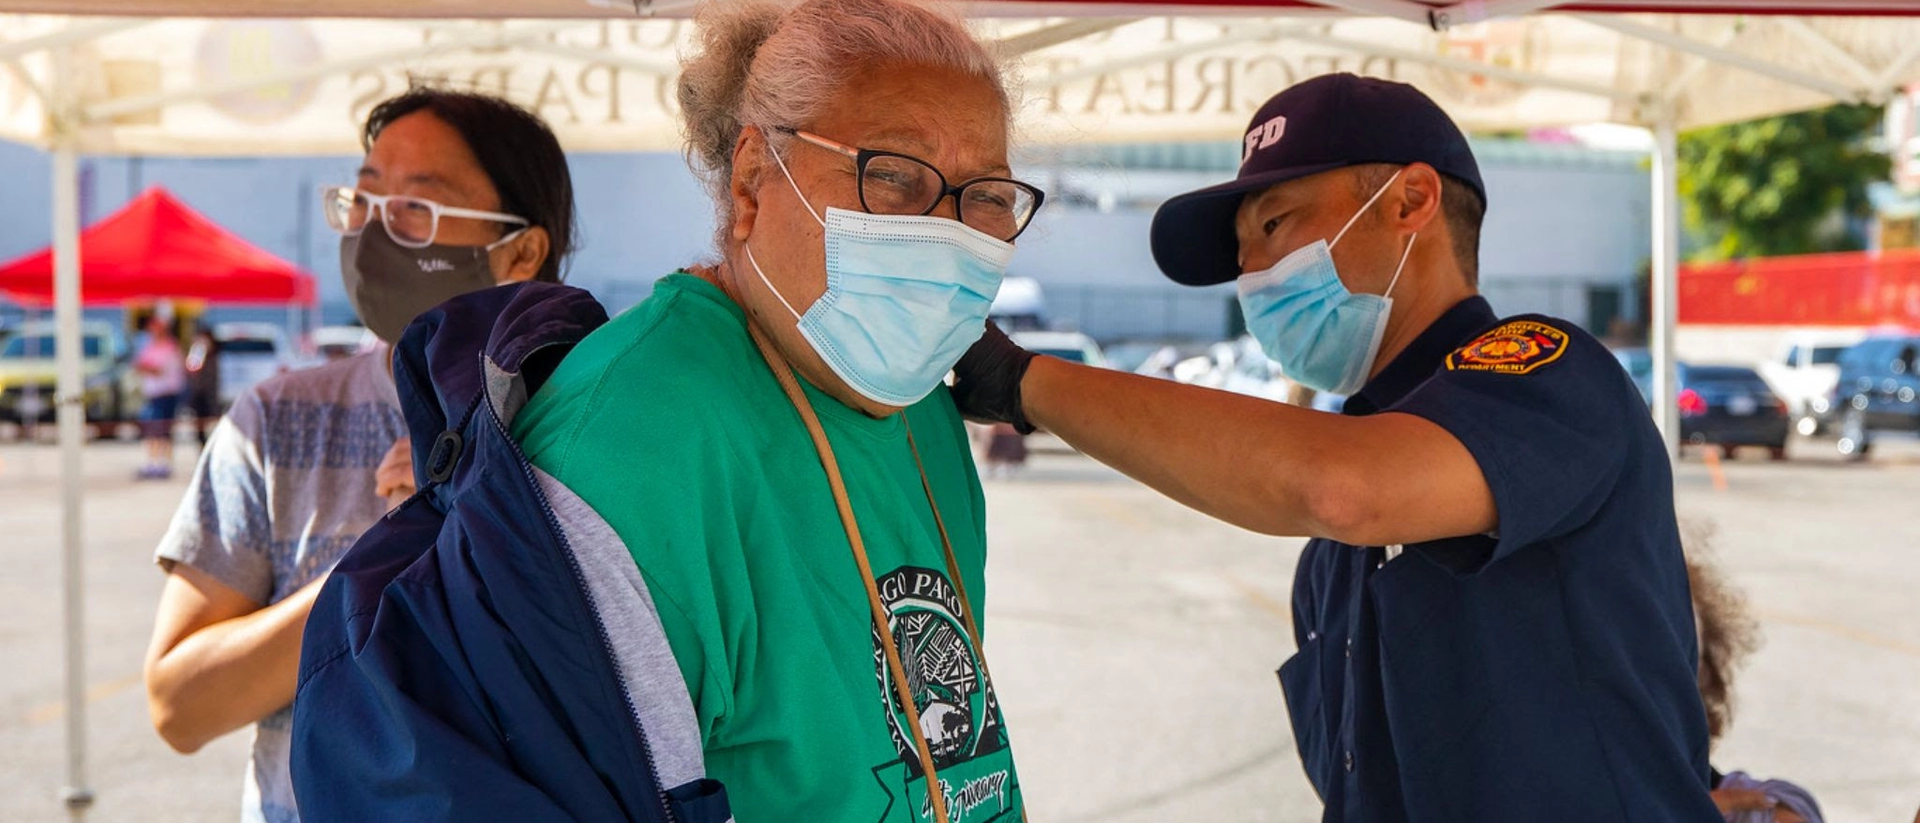 LAFD personnel administering vaccine to elderly patient